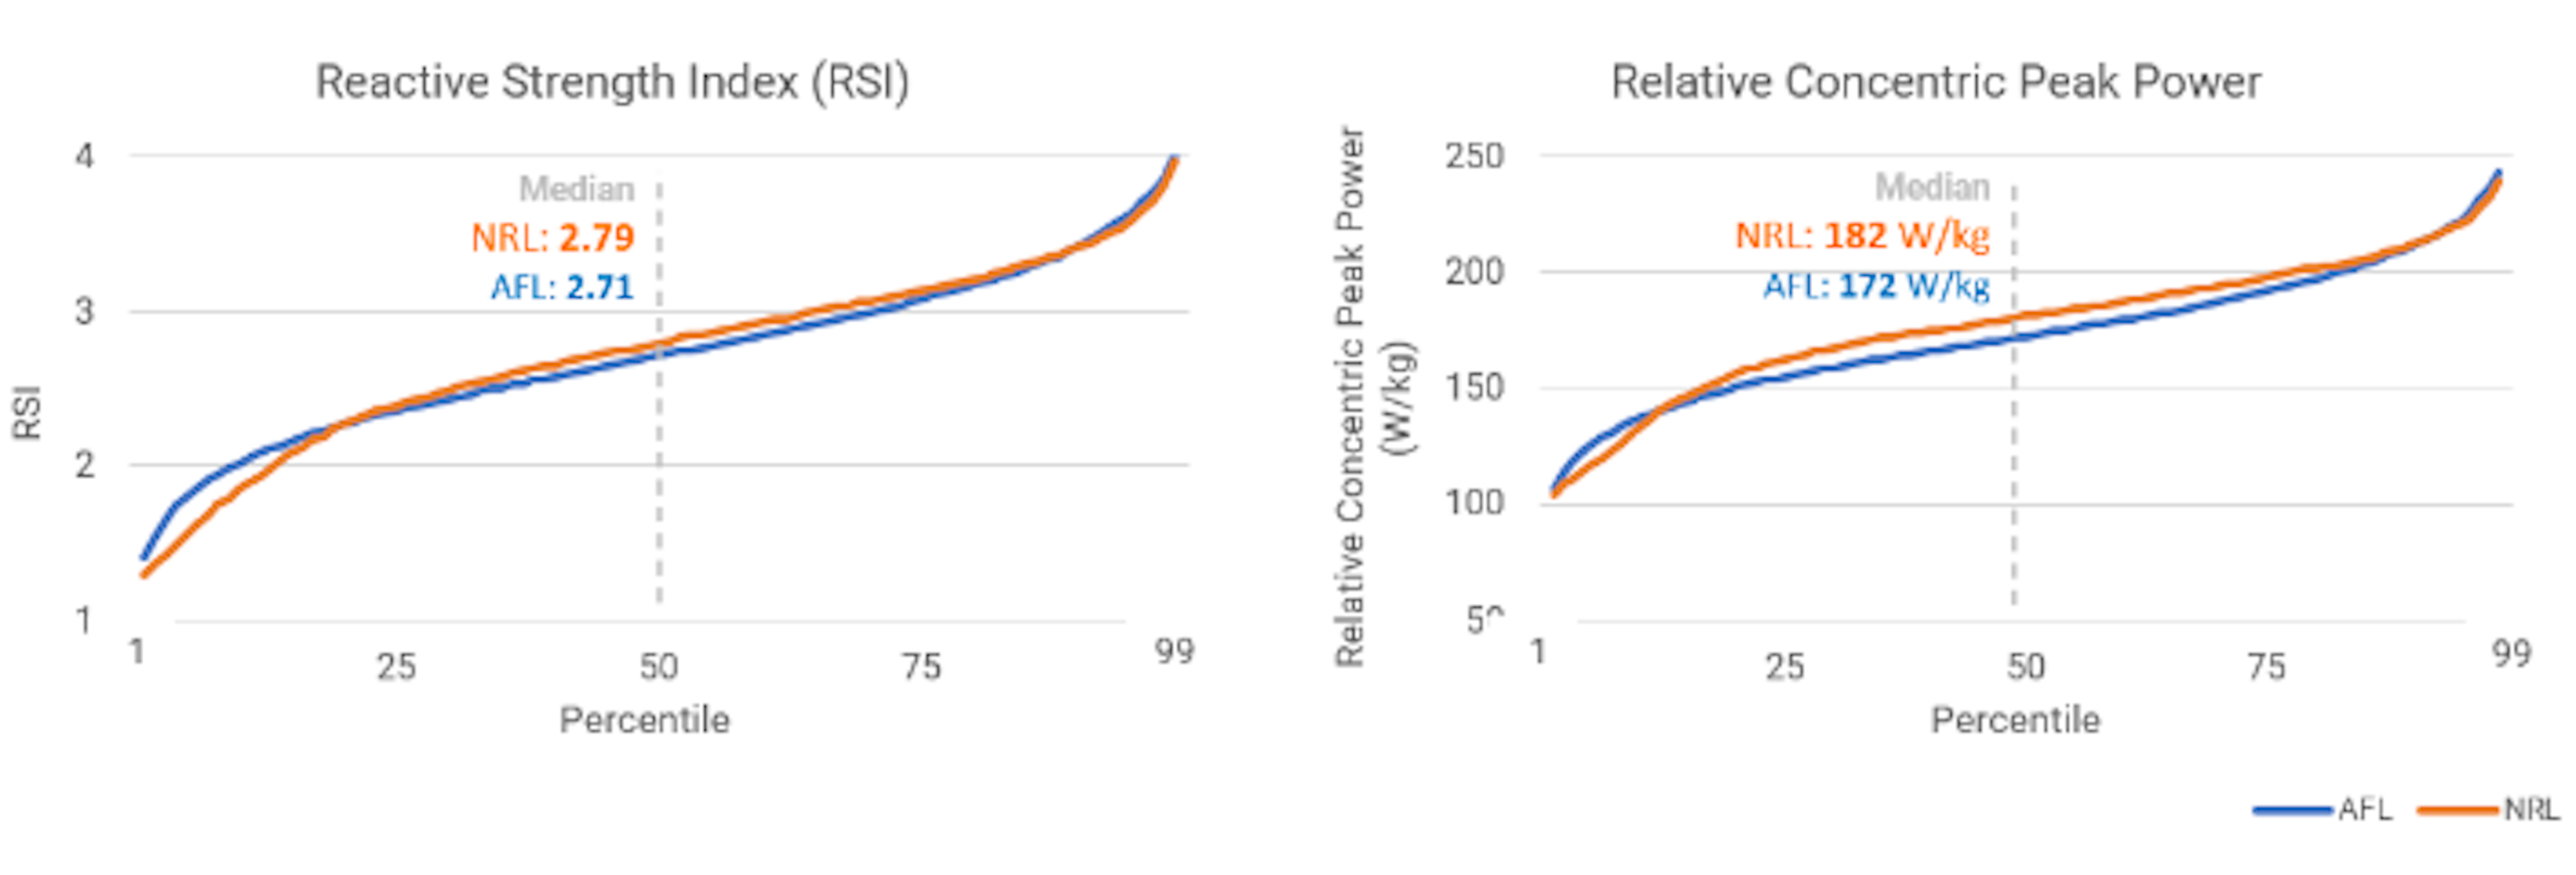 Figure 3. Normative data across two key metrics; Reactive Strength Index (RSI) and relative concentric peak power, across both the AFL and the NRL competitions.